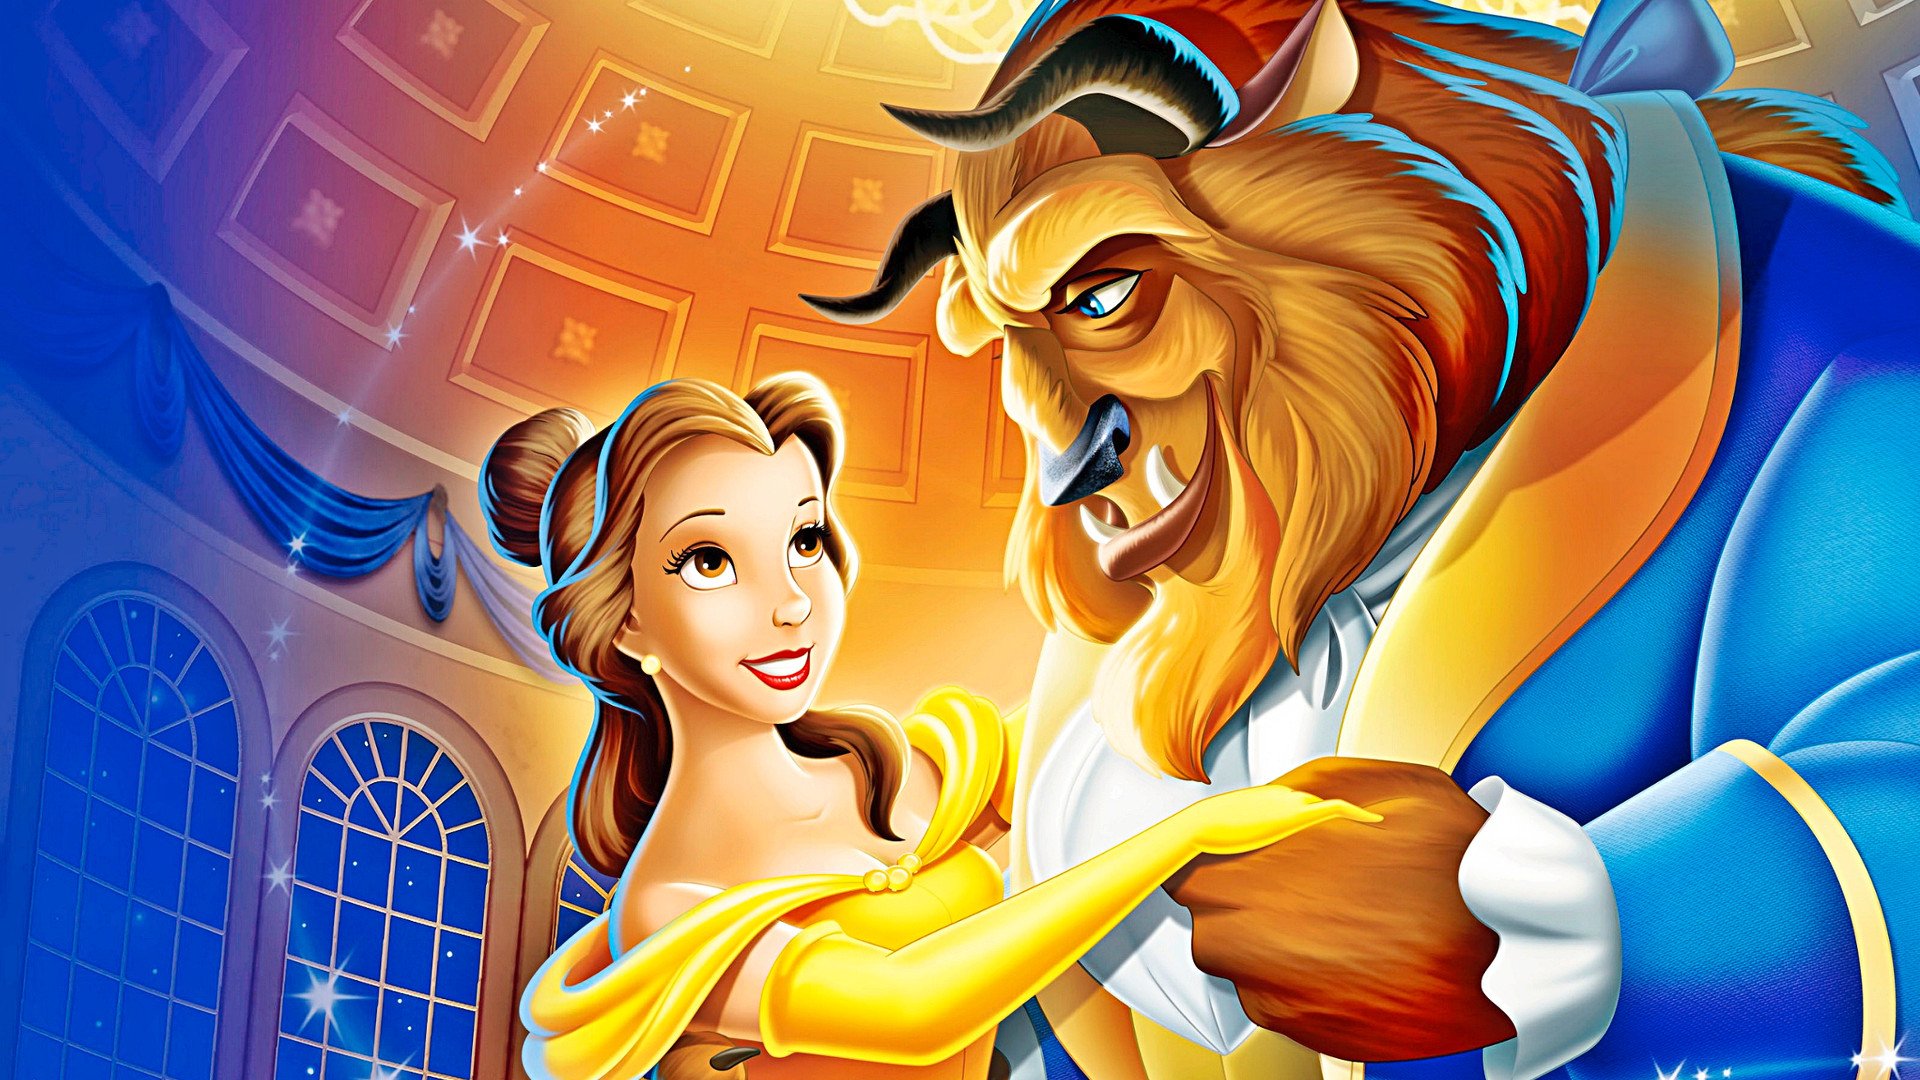 Beauty And The Beast Poster Disney - HD Wallpaper 